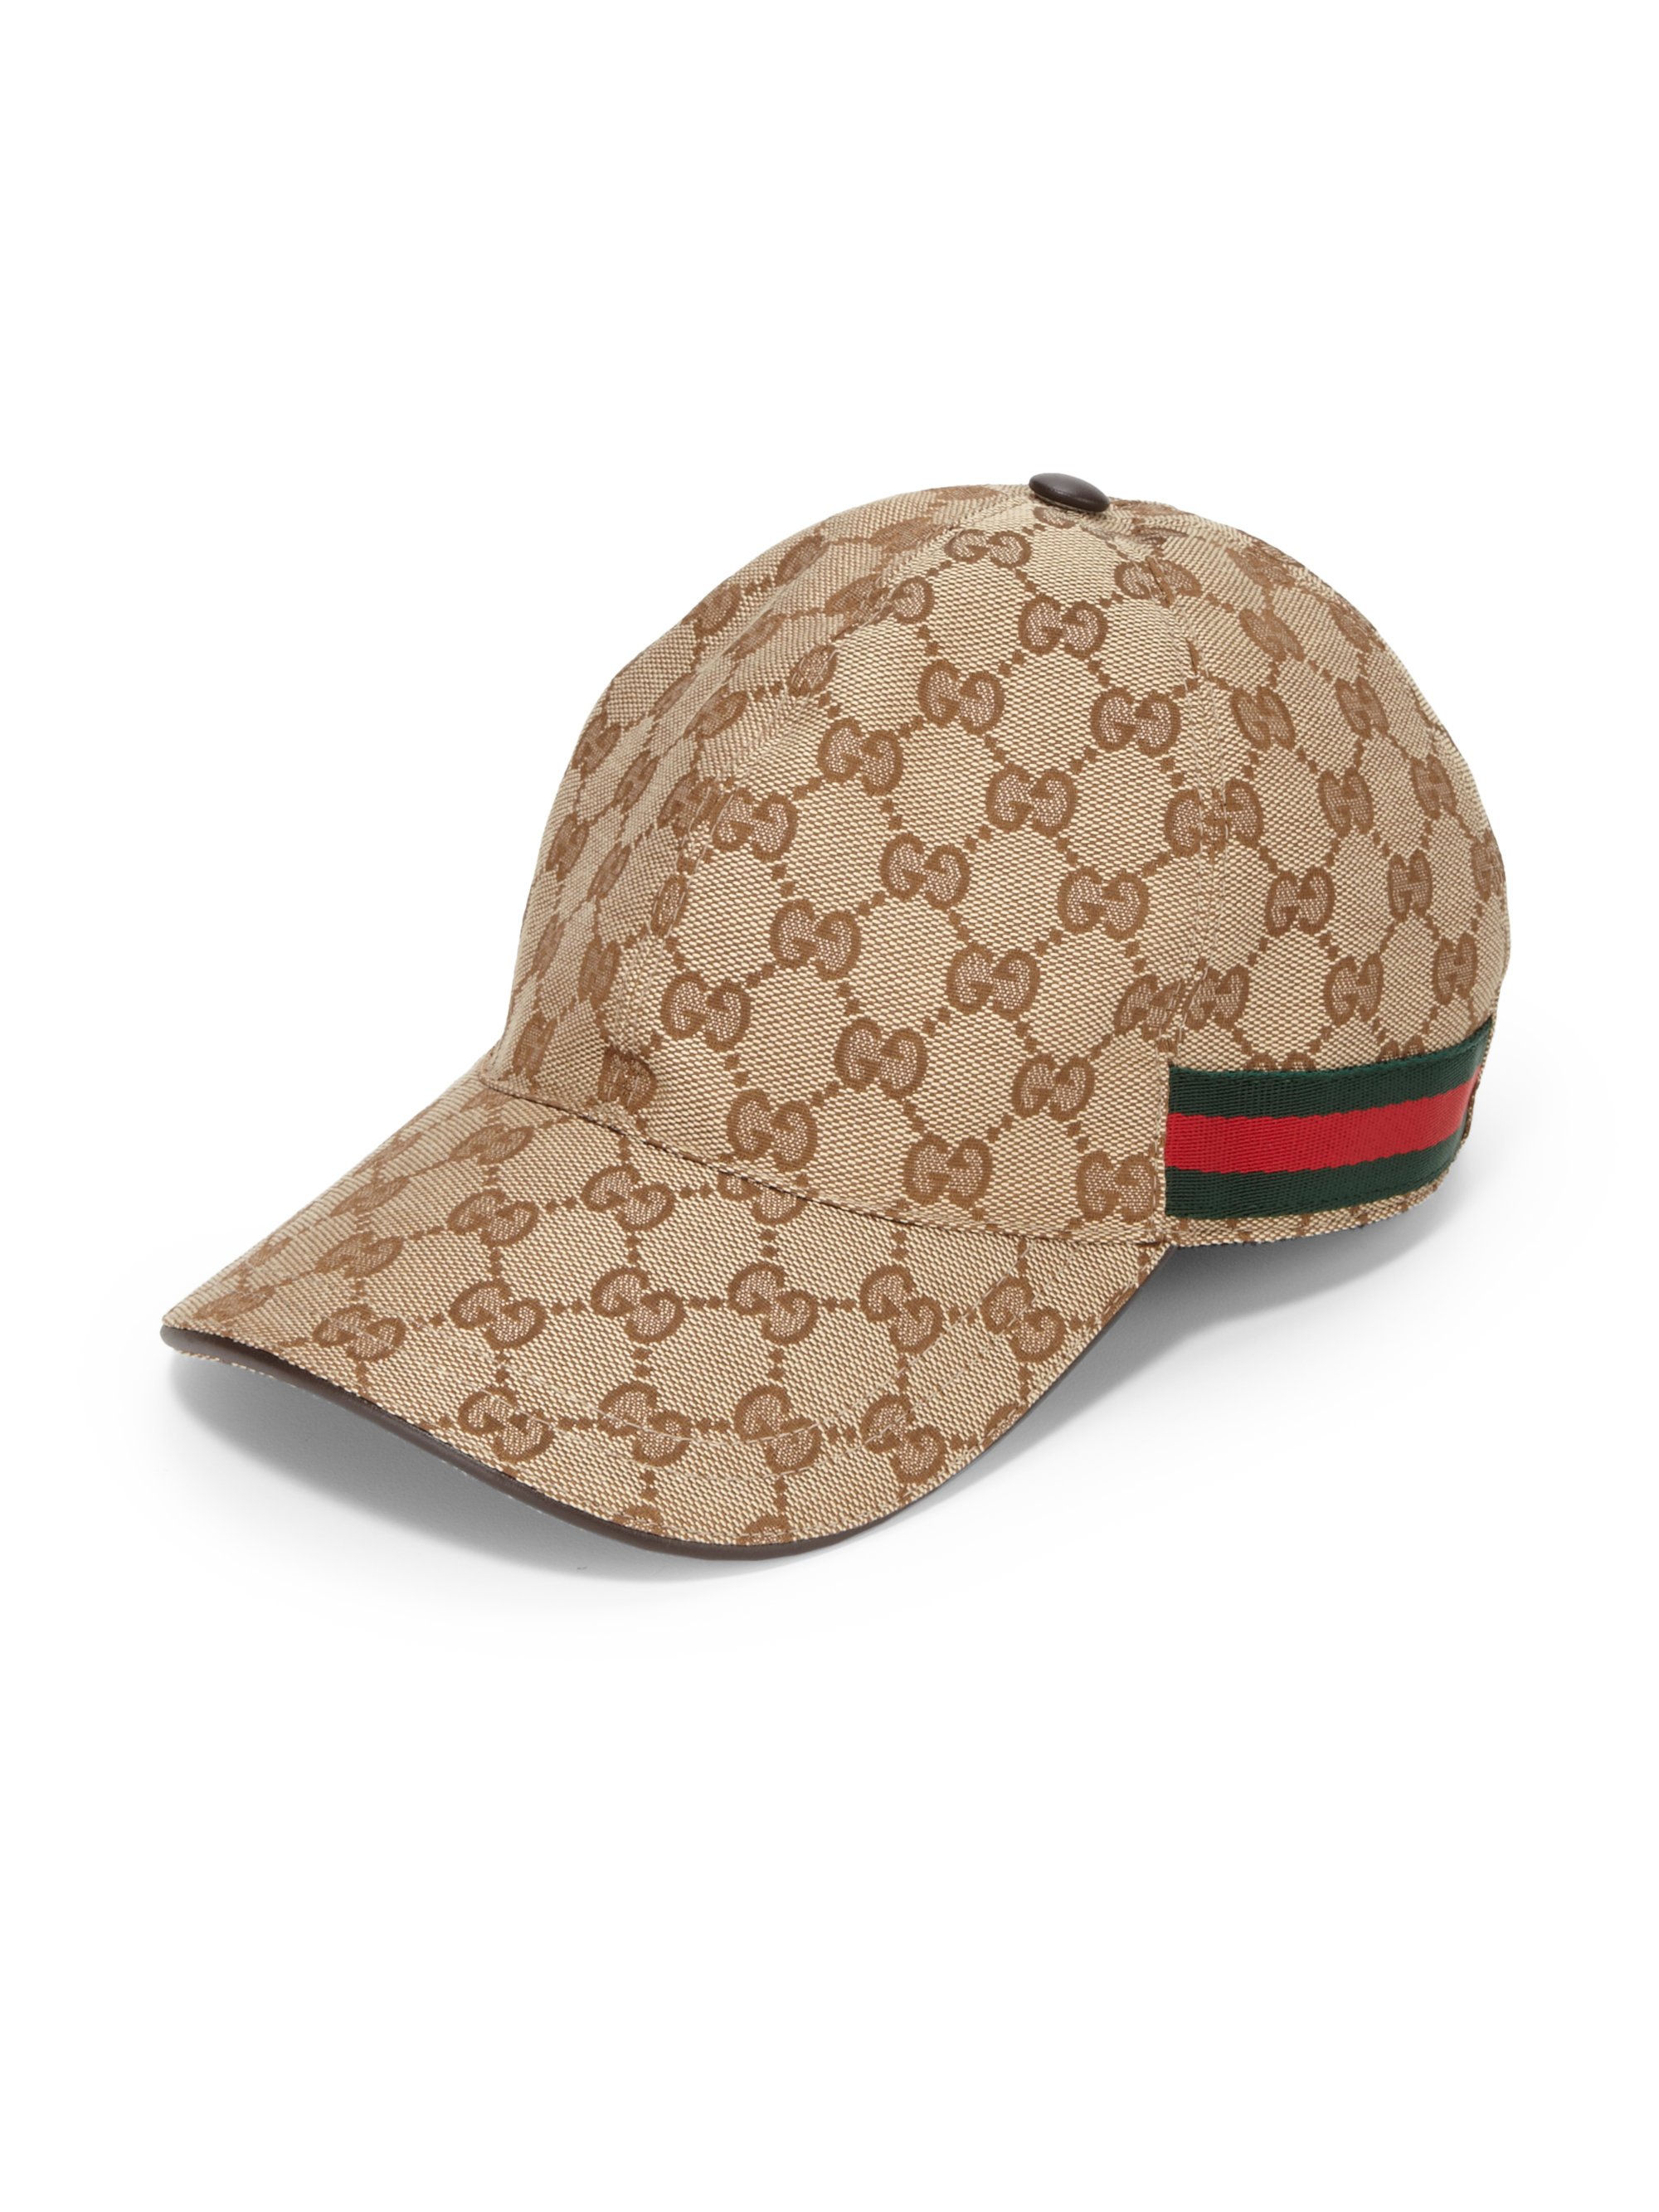 Gucci Cap / Gucci Monogram 'GG' Print Trucker Cap with Tiger and Wolf